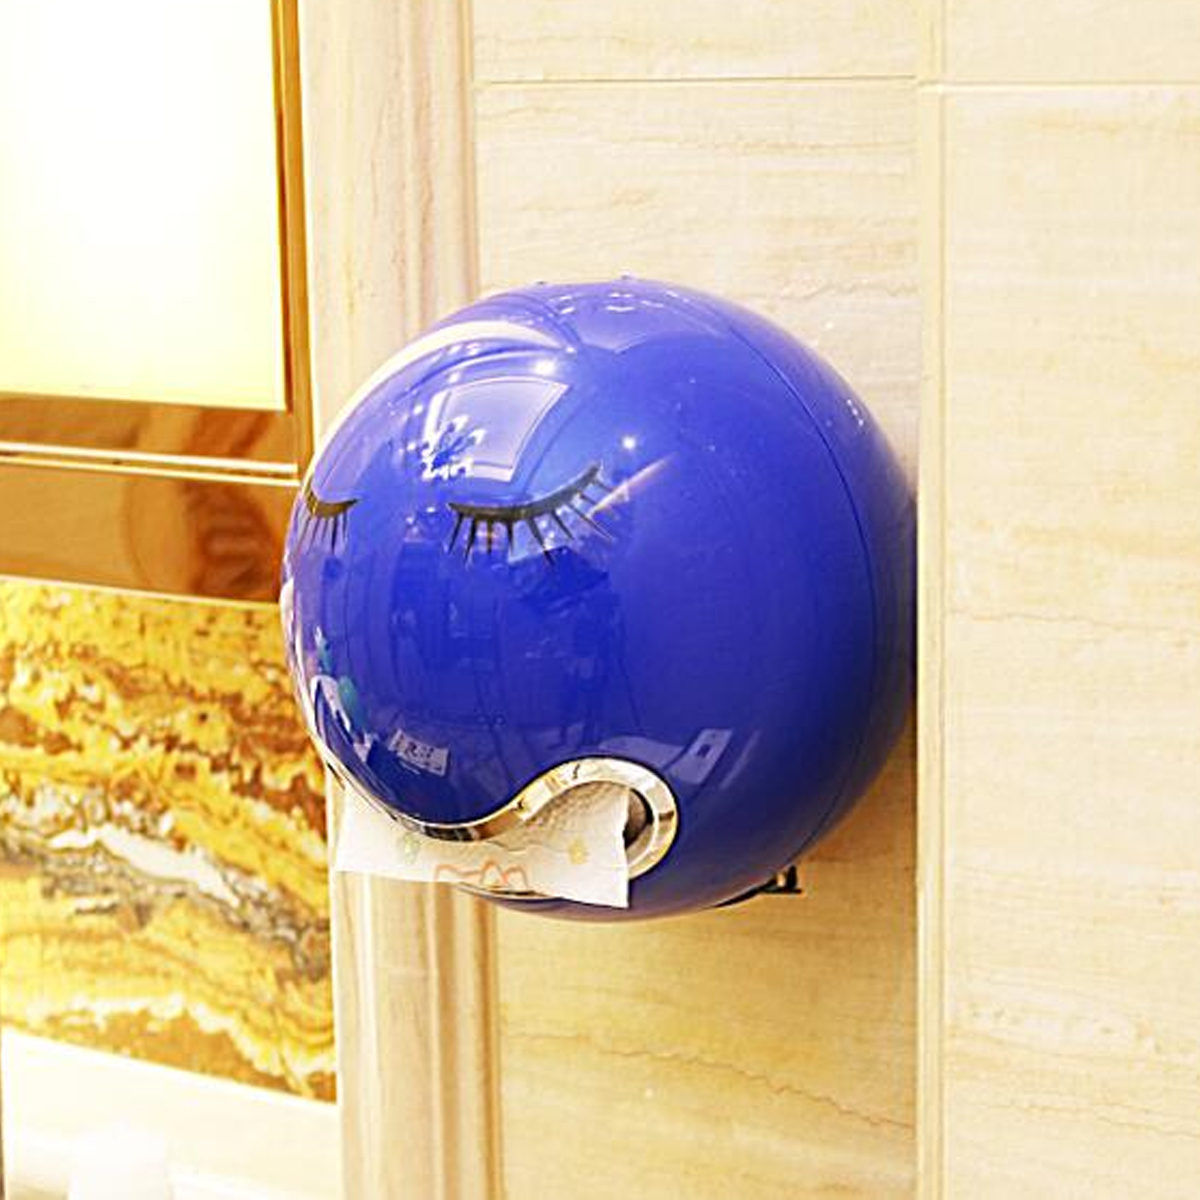 Bathroom-Ball-Shaped-Face-Wall-Mounted-Tissue-Holder-Toilet-Roll-Paper-Box-Paper-Shelf-Holder-1634911-7